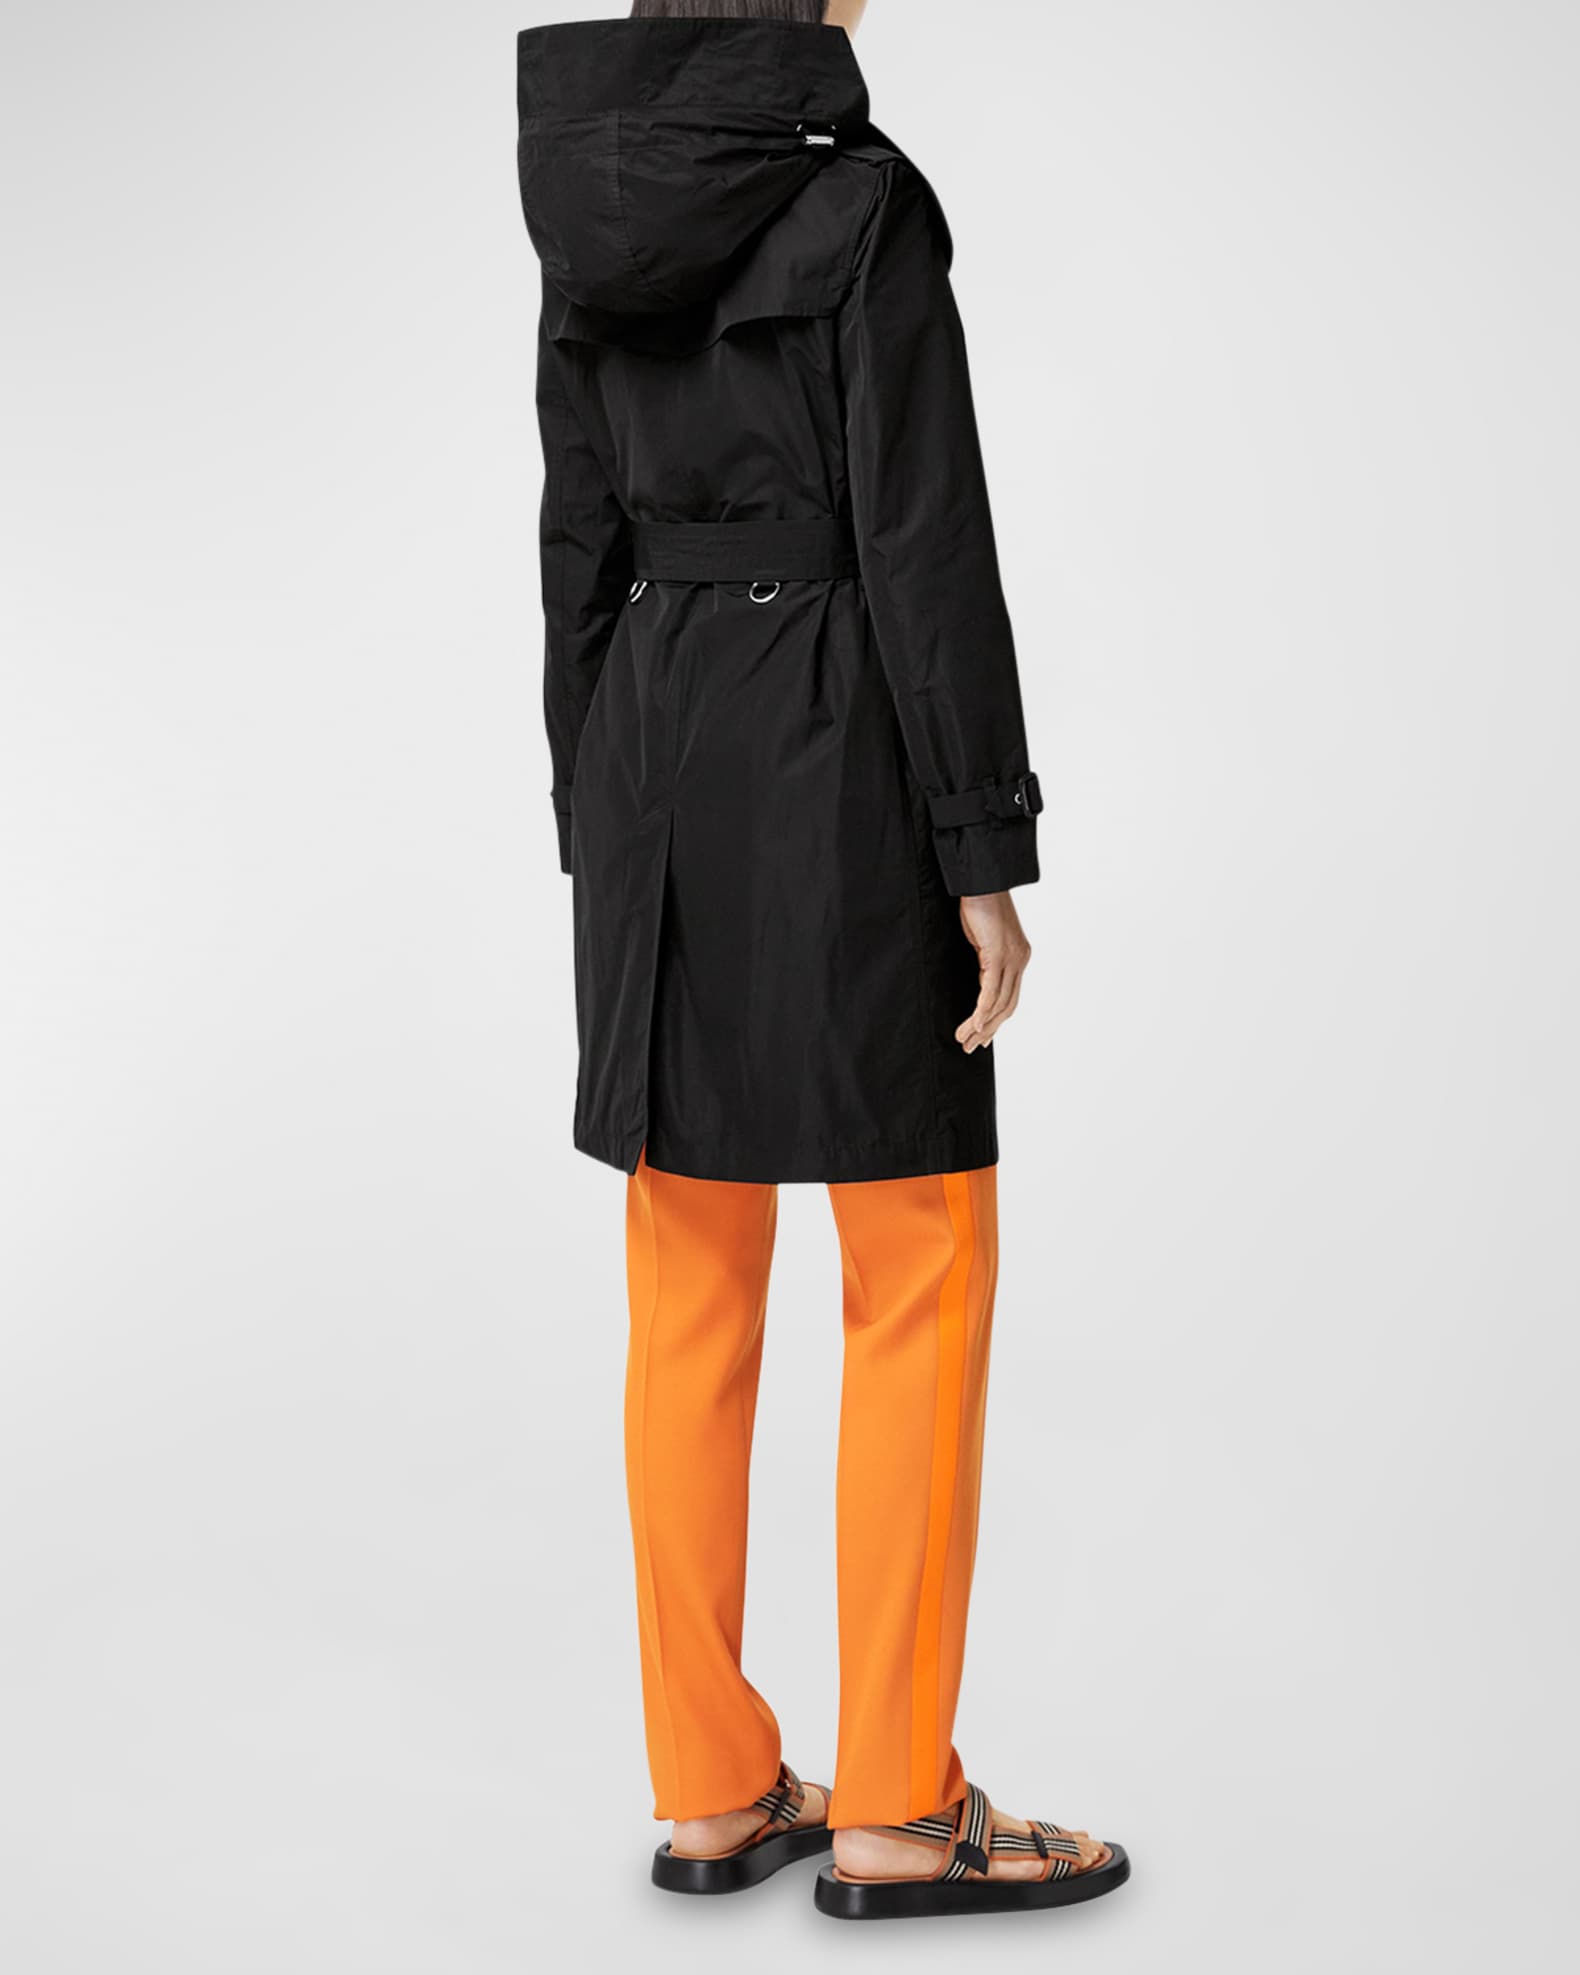 Burberry Kensington Double-Breasted Trench Coat with Detachable Hood |  Neiman Marcus